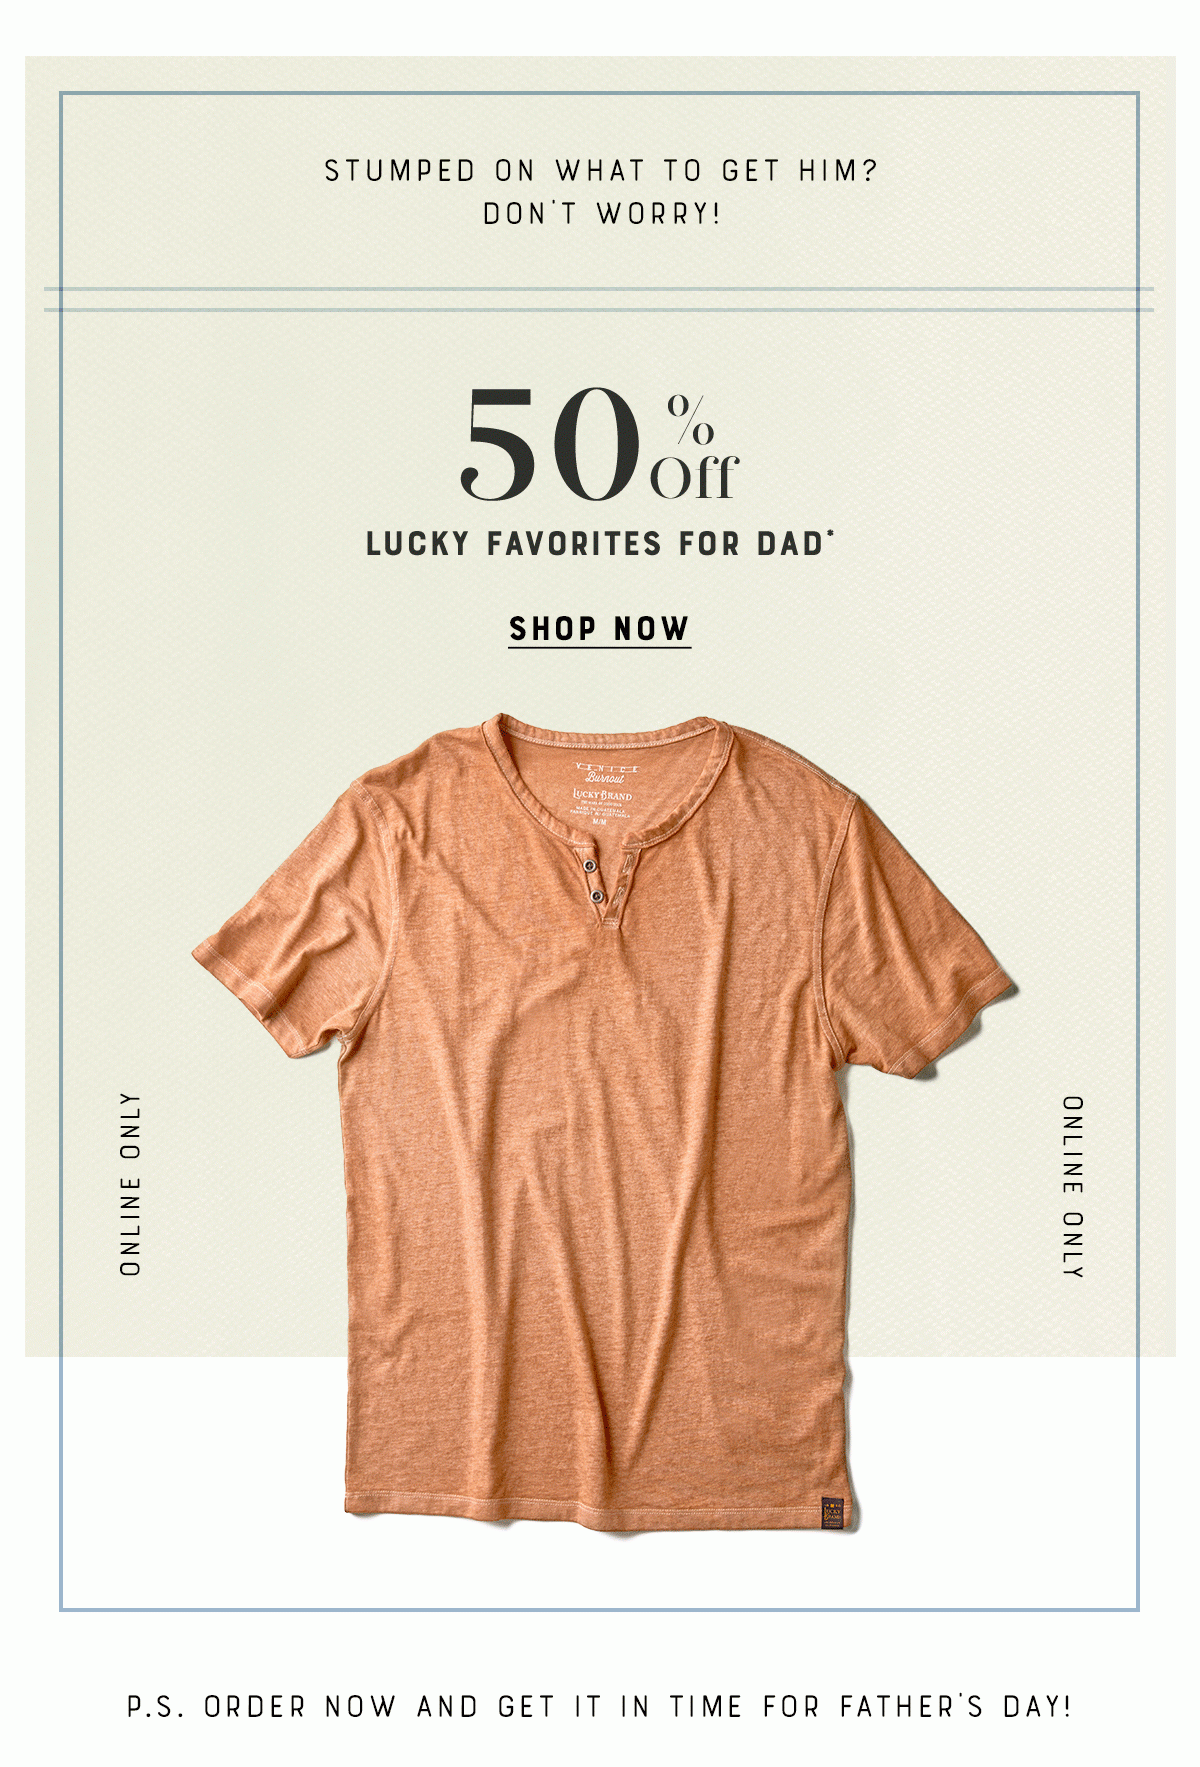 50% off lucky favorites for dad